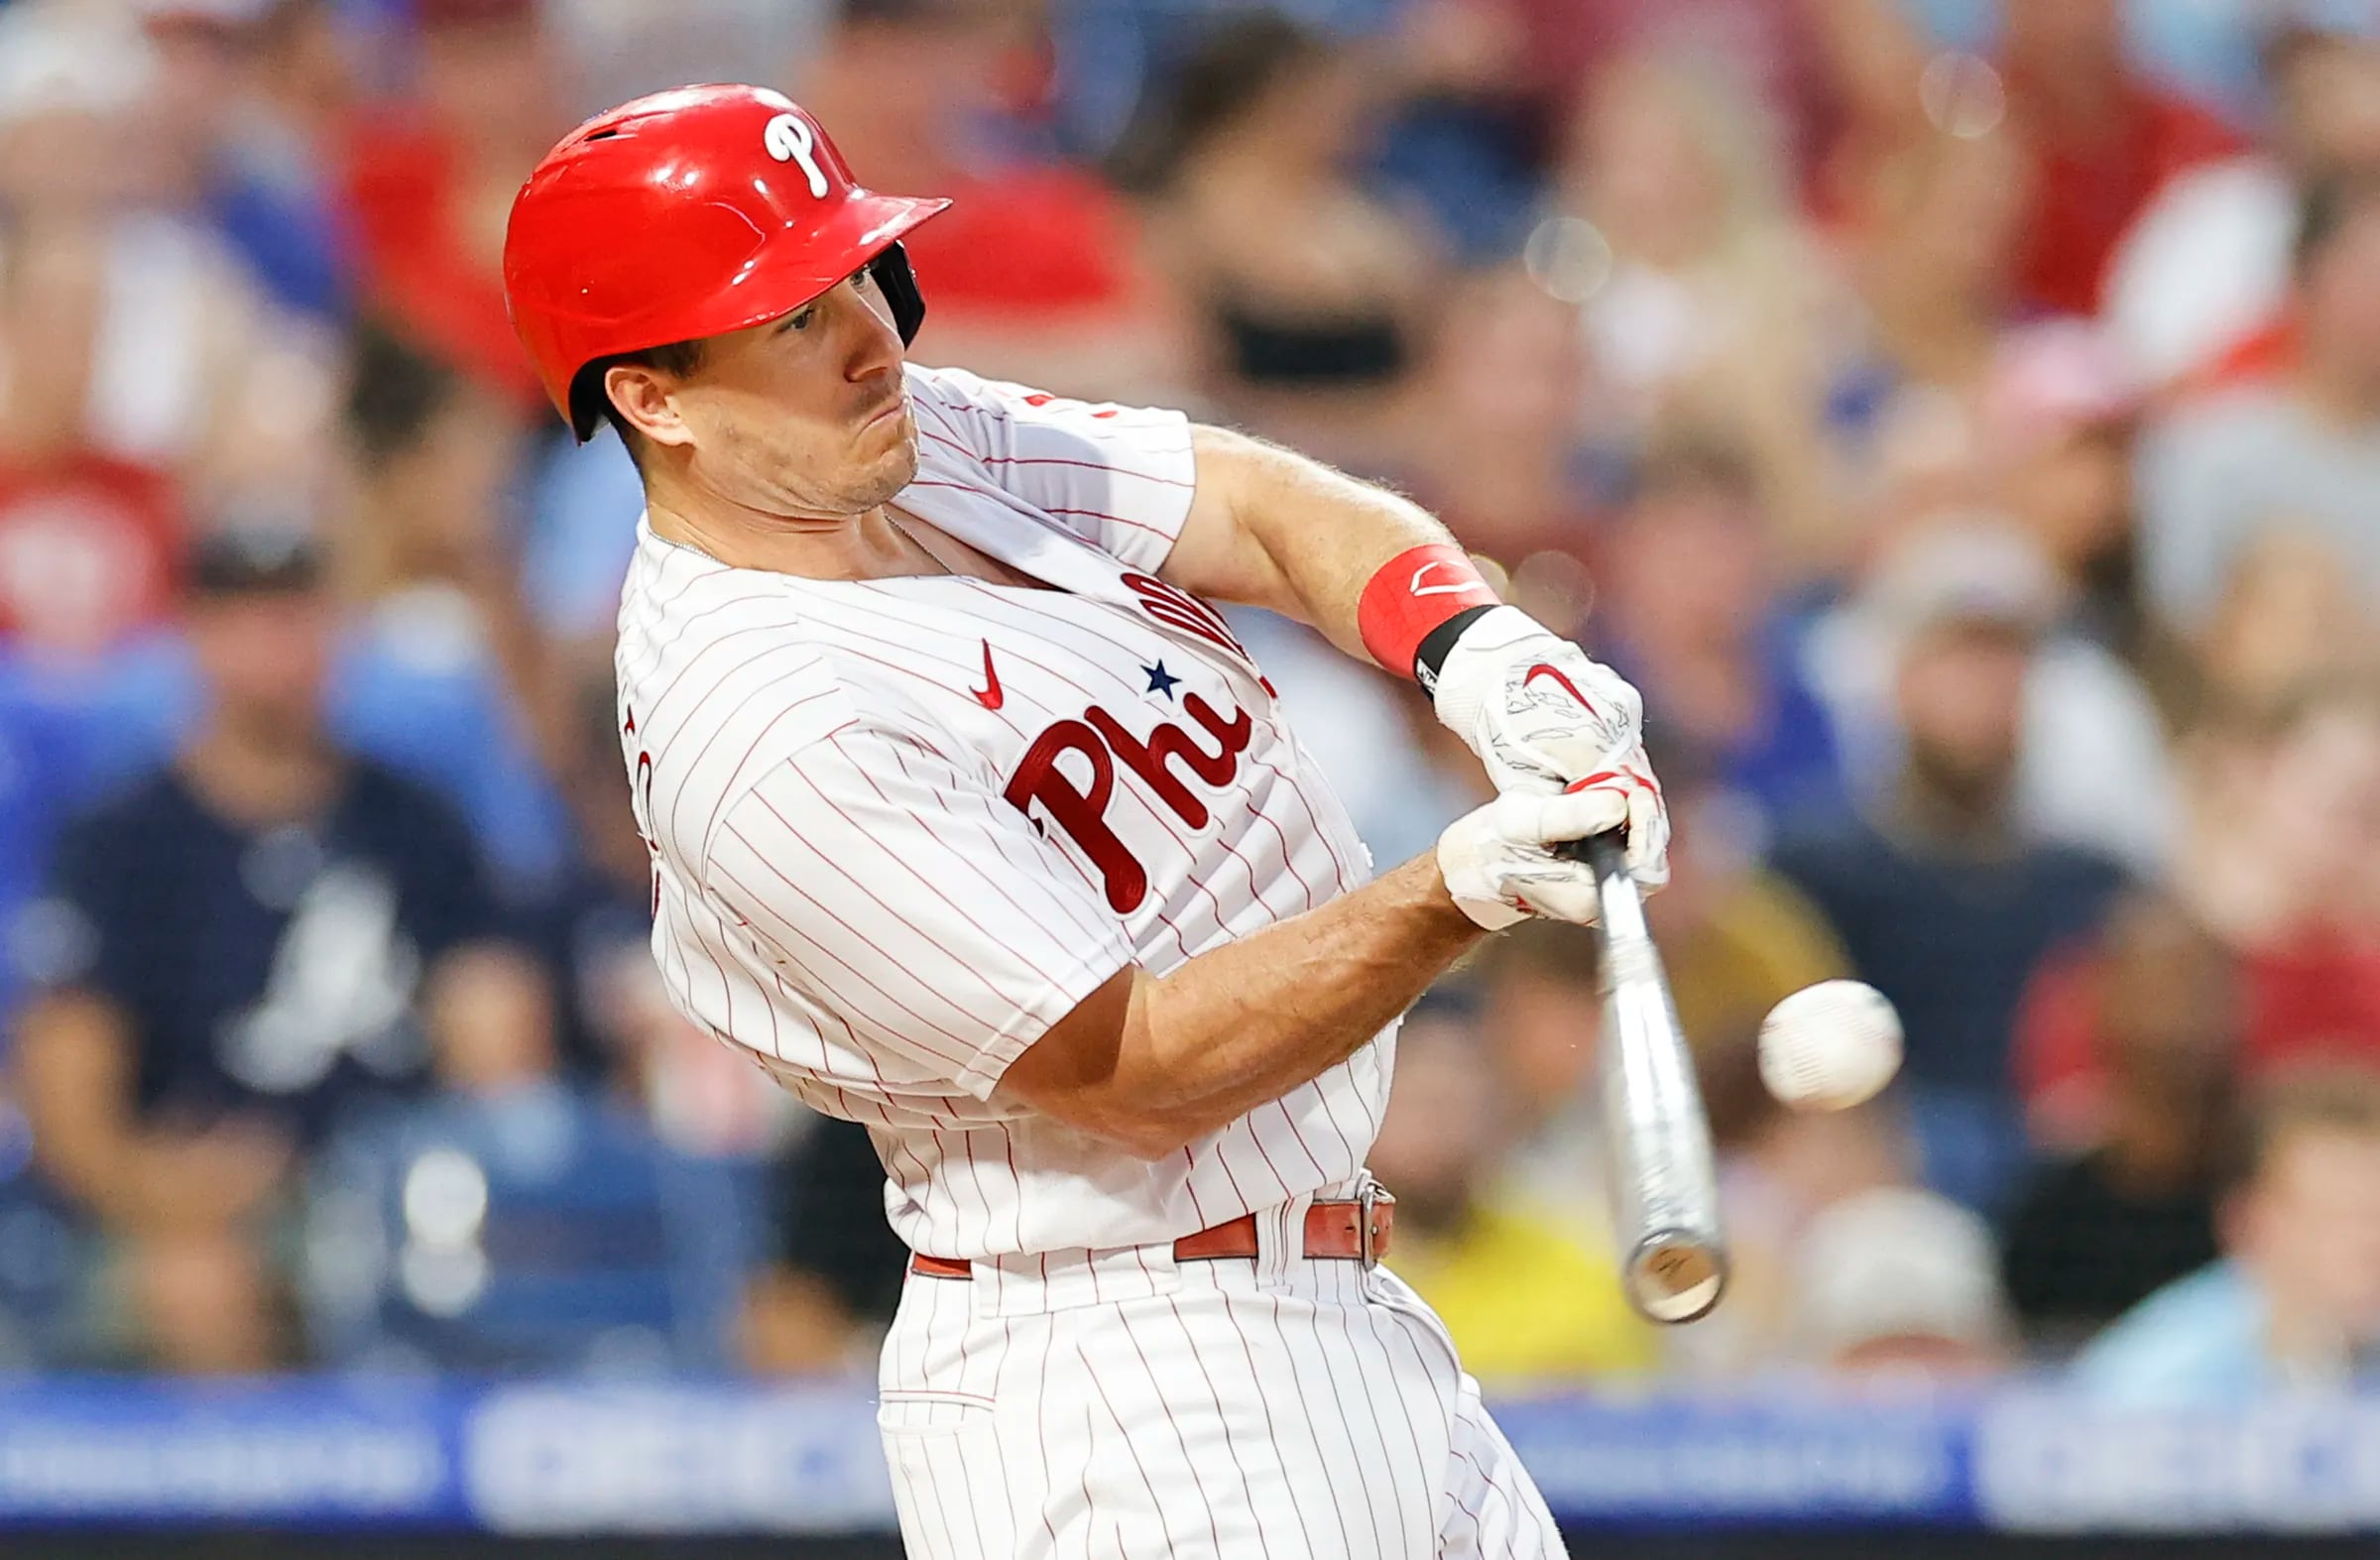 Phillies rally from 6 down, beat Bucs 12-6 to gain on Braves